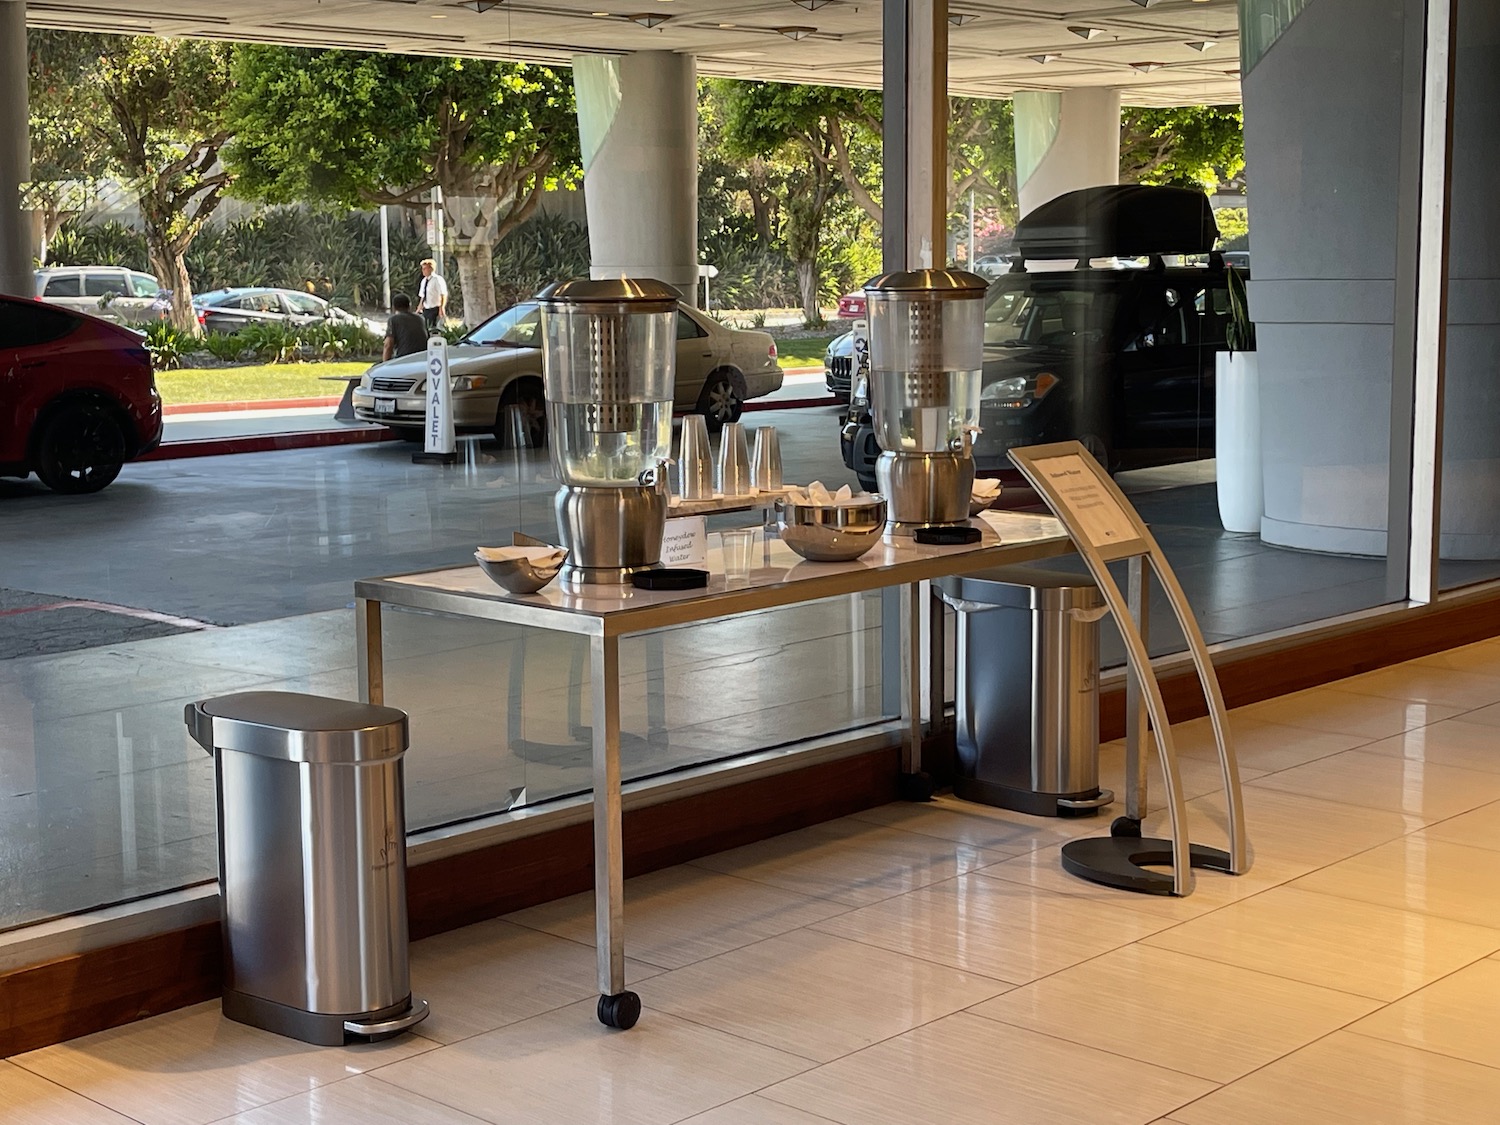 a table with a drink dispenser and trash can